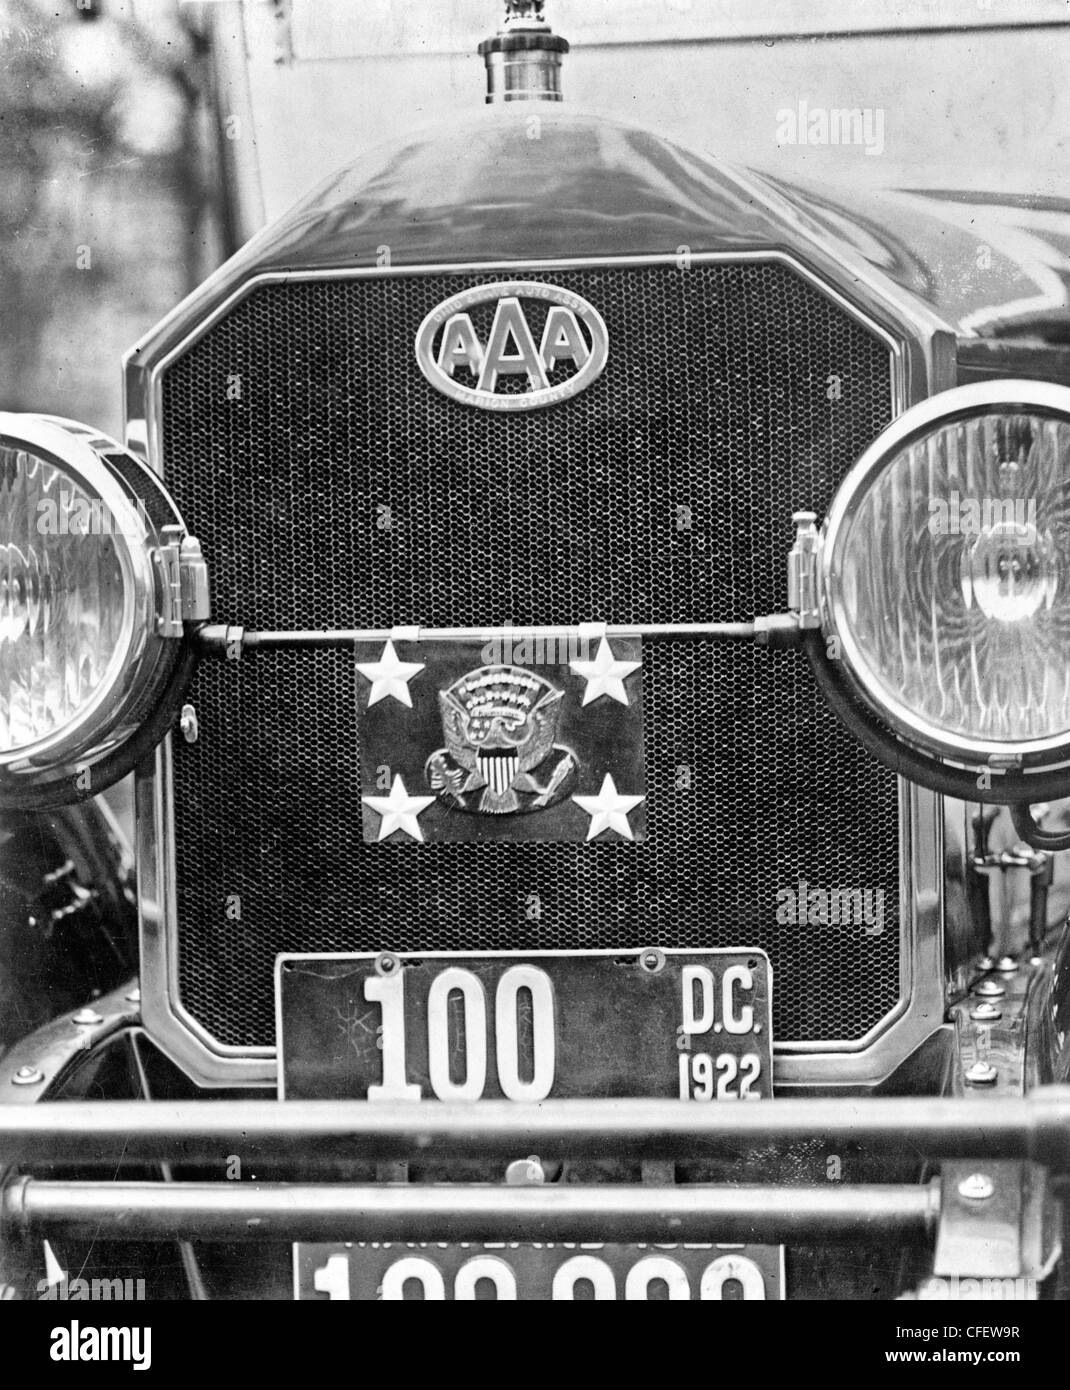 Automobile grill Black and White Stock Photos & Images - Alamy